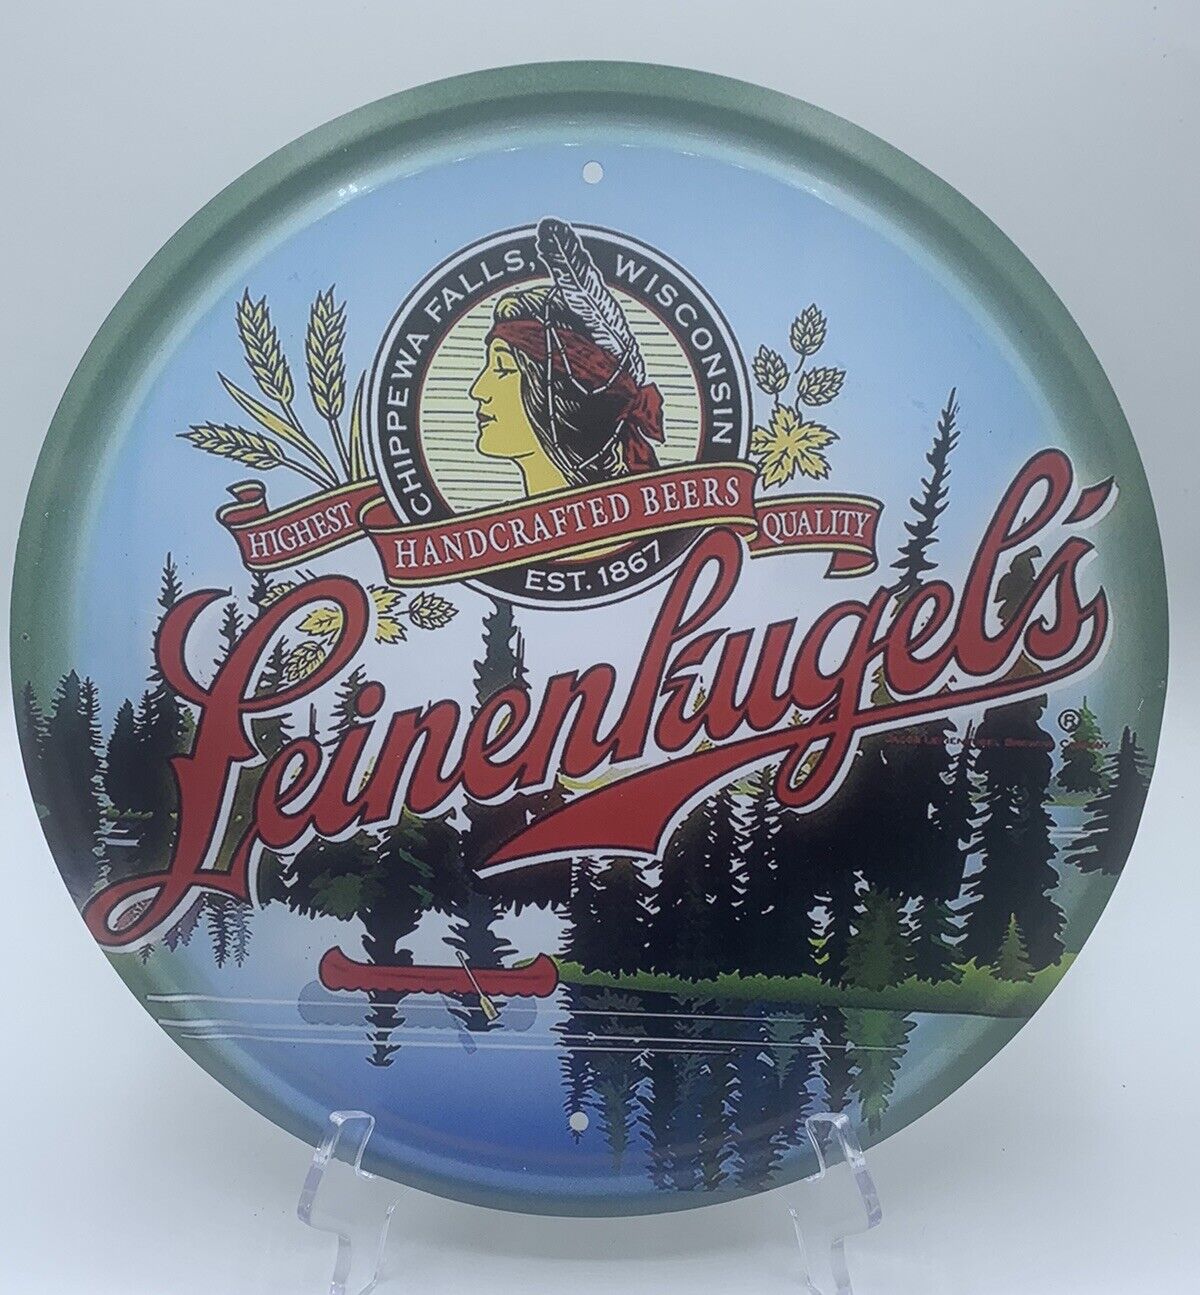 Chippewa Falls Wisconsin Leinenkugel’s Handcrafted Beers Circle Aluminum Sign